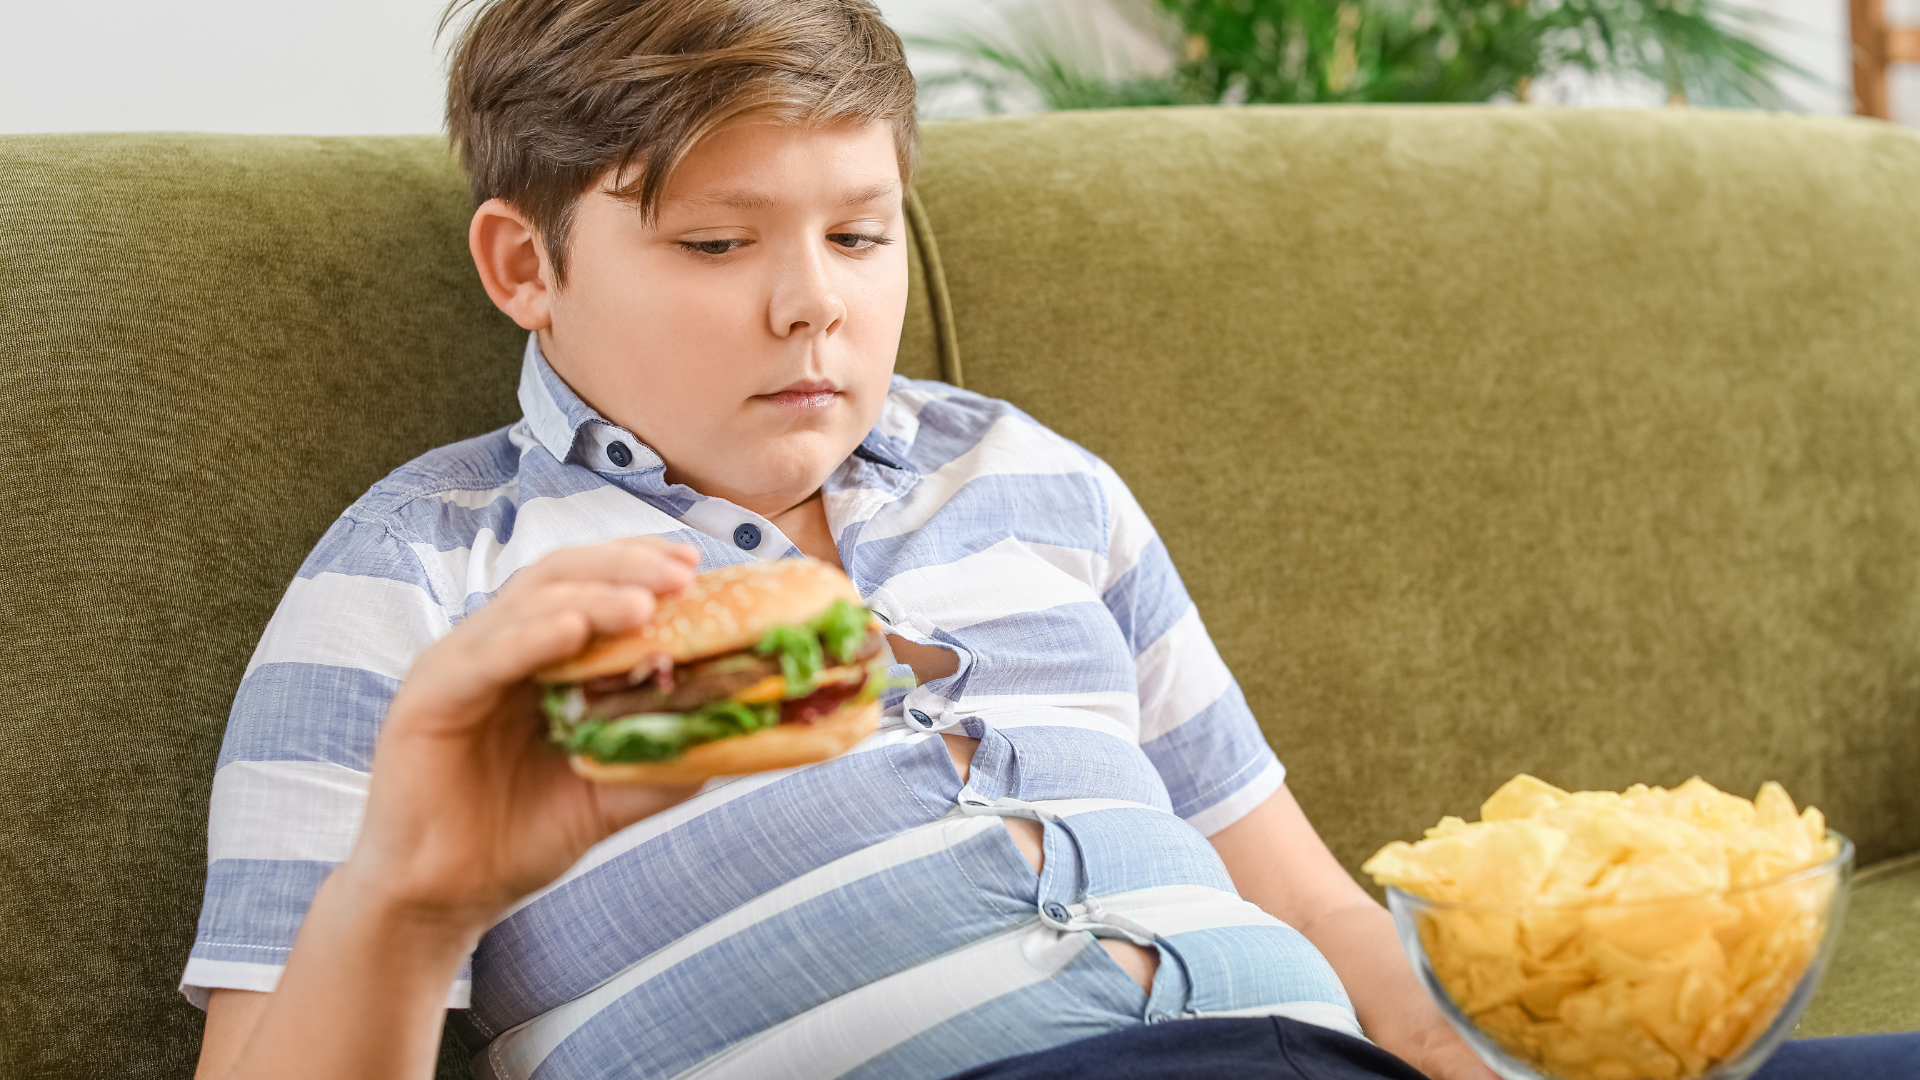 Are parents responsible for childhood obesity?